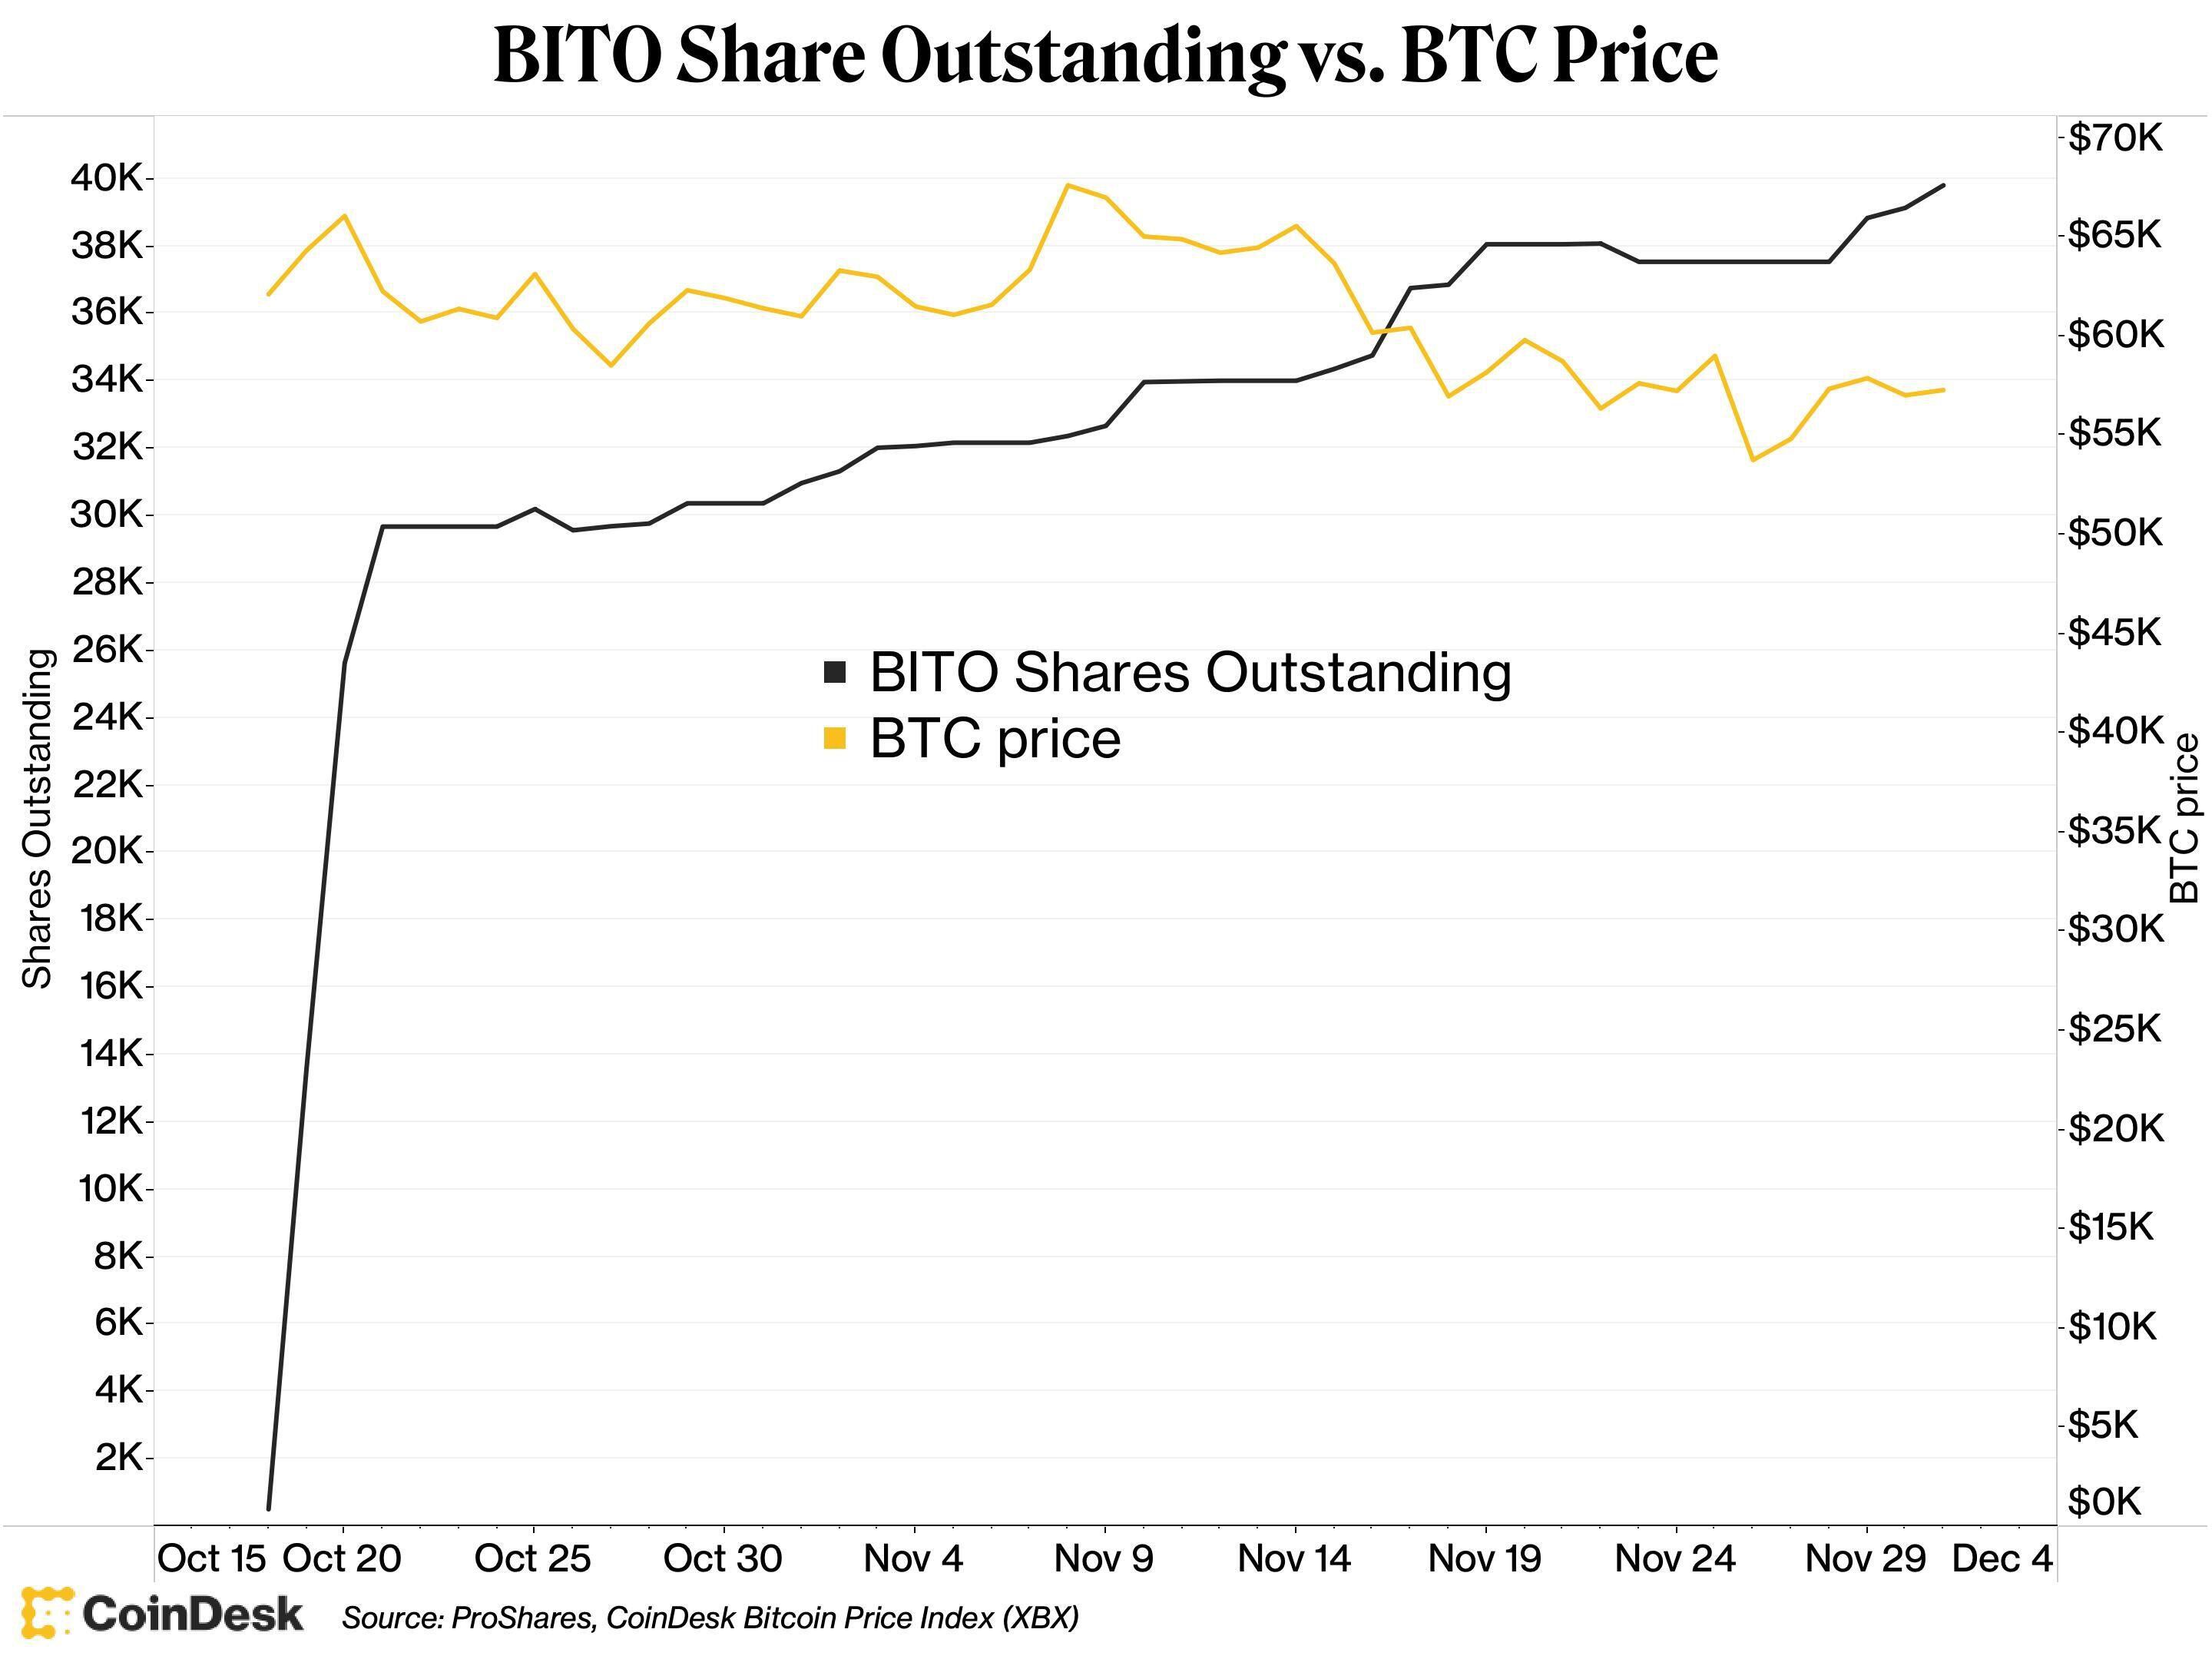 ProShares Bitcoin Strategy ETF (BITO) shares outstanding versus bitcoin prices.